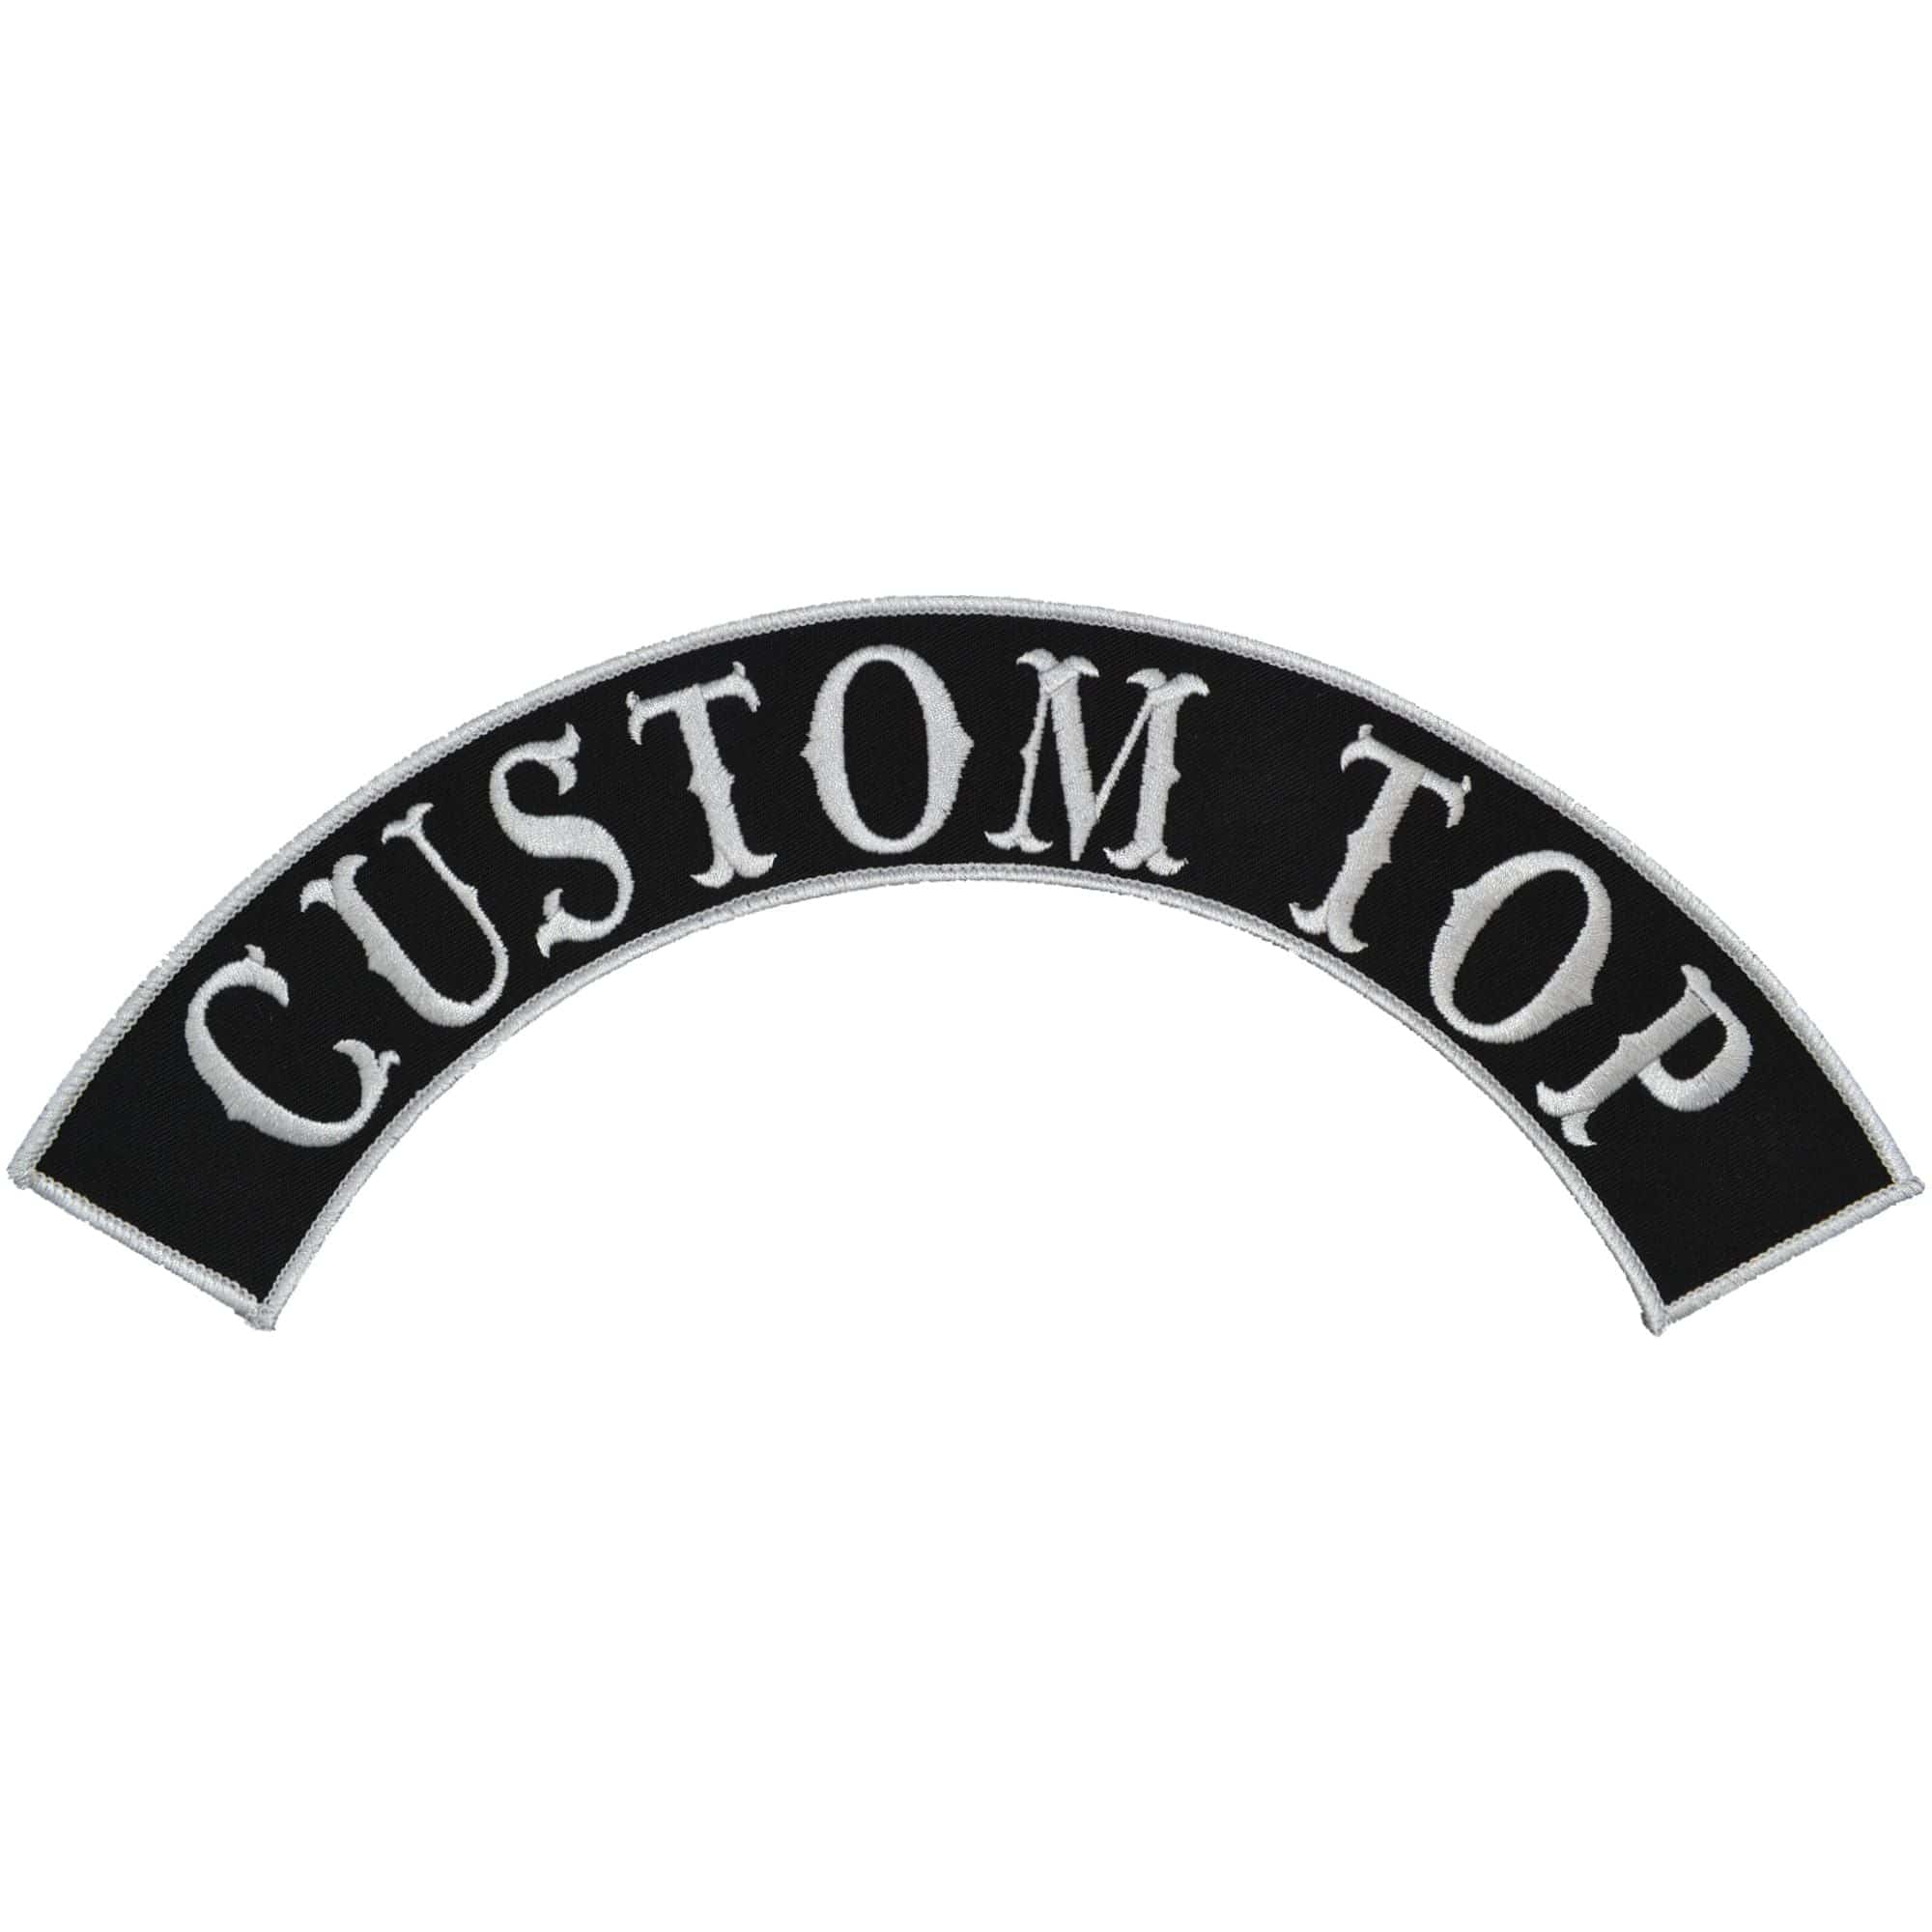 Tactical Gear Junkie Patches Custom Biker Vest Patch - Top Arch Style Tab - Sew On